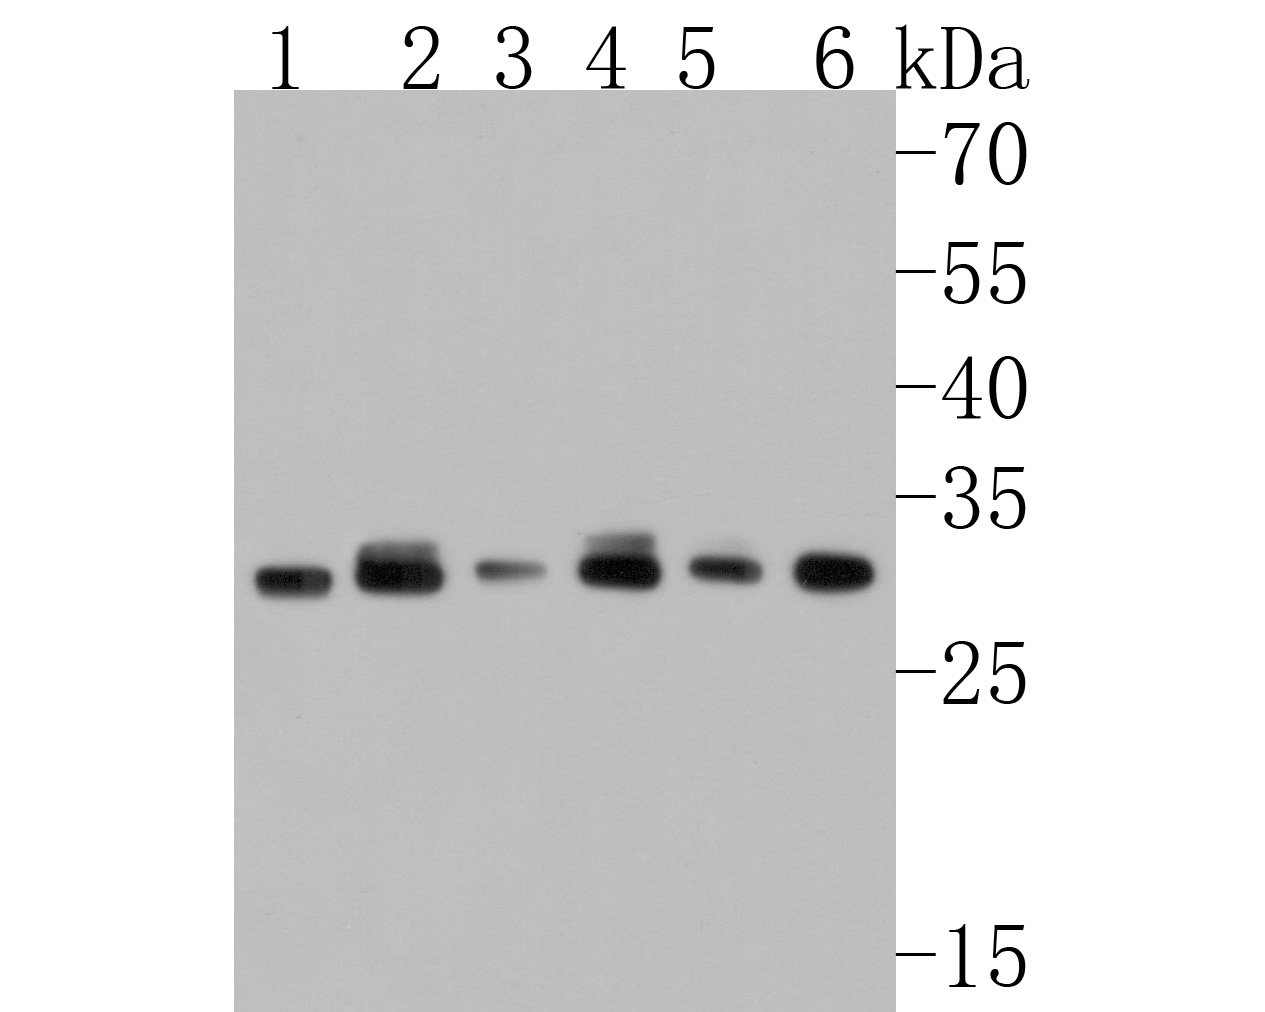 Western blot analysis of GC1q R on different lysates. Proteins were transferred to a PVDF membrane and blocked with 5% NFTM/TBSA for 1 hour at room temperature. The primary antibody (HA720078, 1/500) was used in 5% NFTM/TBSA at room temperature for 2 hours. Goat Anti-Rabbit IgG - HRP Secondary Antibody (HA1001) at 1:200,000 dilution was used for 1 hour at room temperature.<br />
Positive control: <br />
Lane 1: PC-12 cell lysate<br />
Lane 2: NIH/3T3 cell lysate<br />
Lane 3: RAW264.7 cell lysate<br />
Lane 4: Hela cell lysate<br />
Lane 5: A549 cell lysate<br />
Lane 6: Mouse spleen tissue lysate